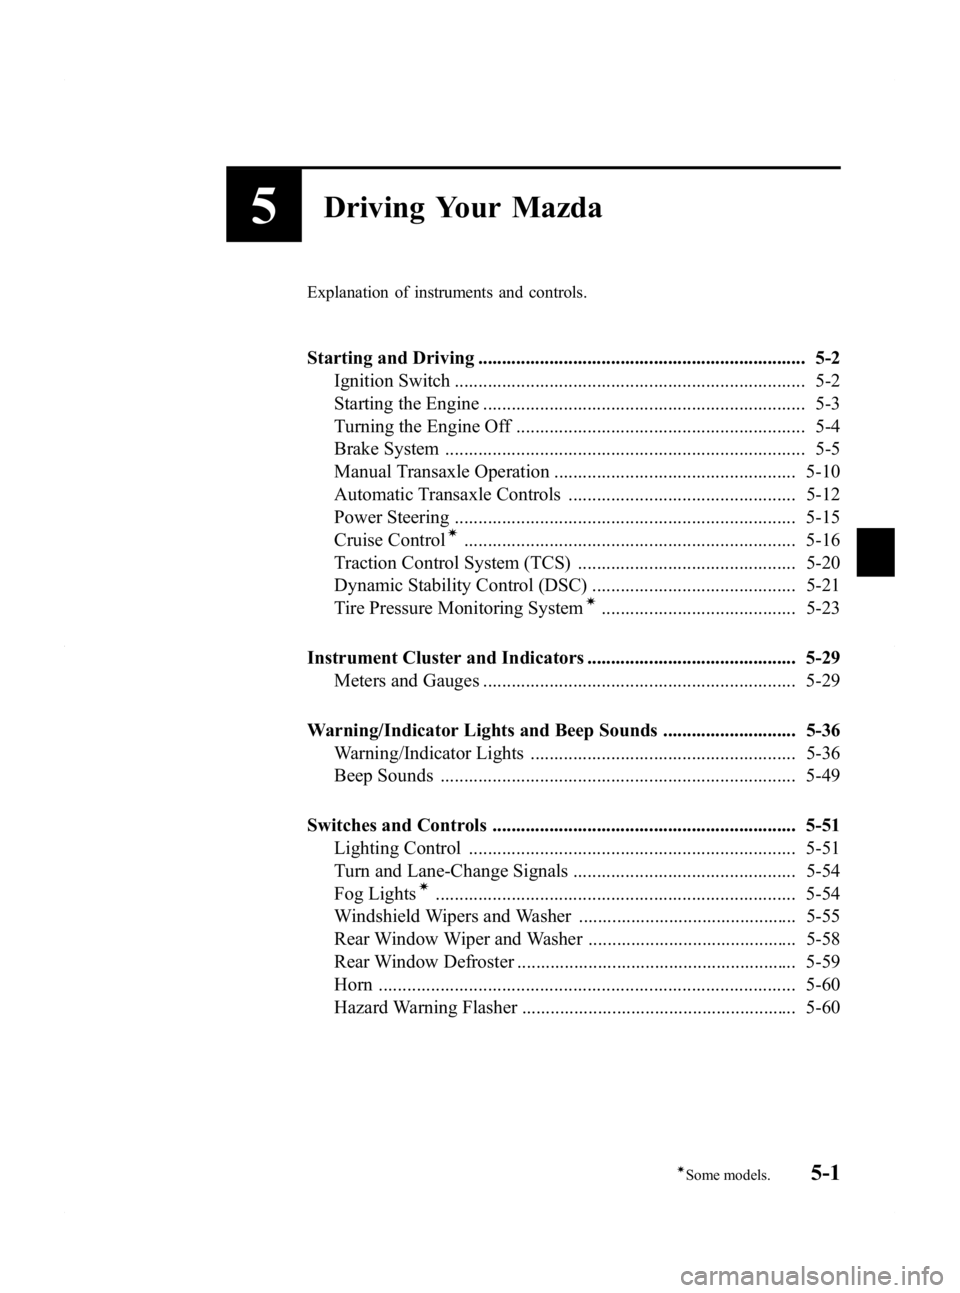 MAZDA MODEL 2 2011  Owners Manual Black plate (107,1)
5Driving Your Mazda
Explanation of instruments and controls.
Starting and Driving ..................................................................... 5-2Ignition Switch .........